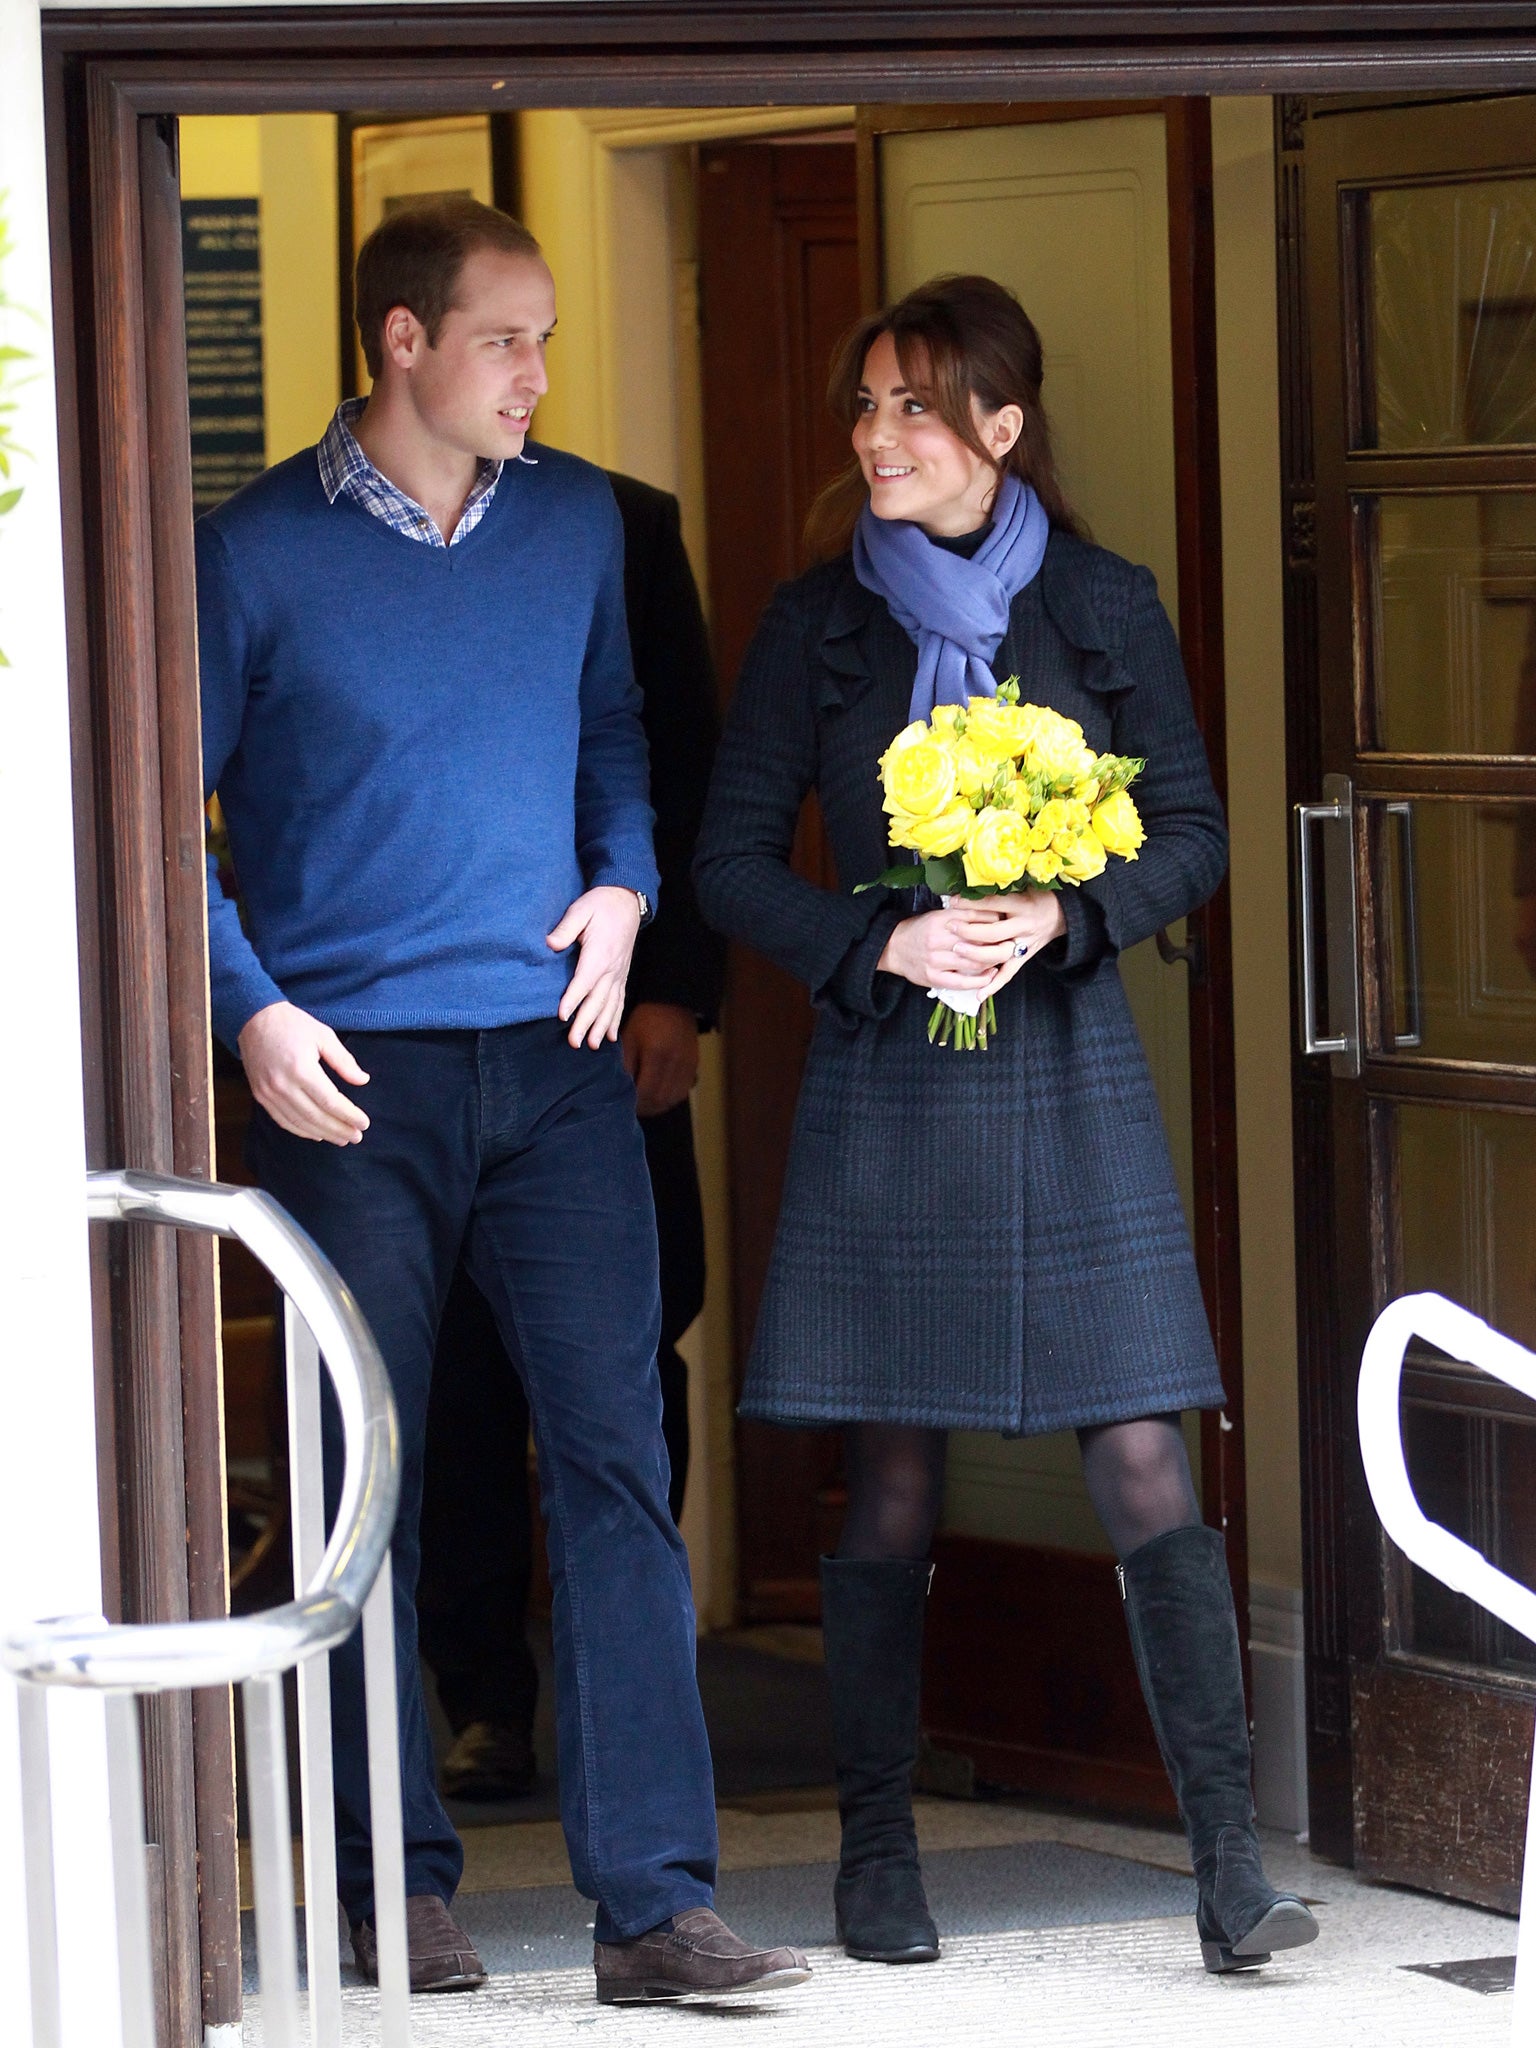 The Duke and Duchess of Cambridge's baby is due in July, St James's Palace announced today